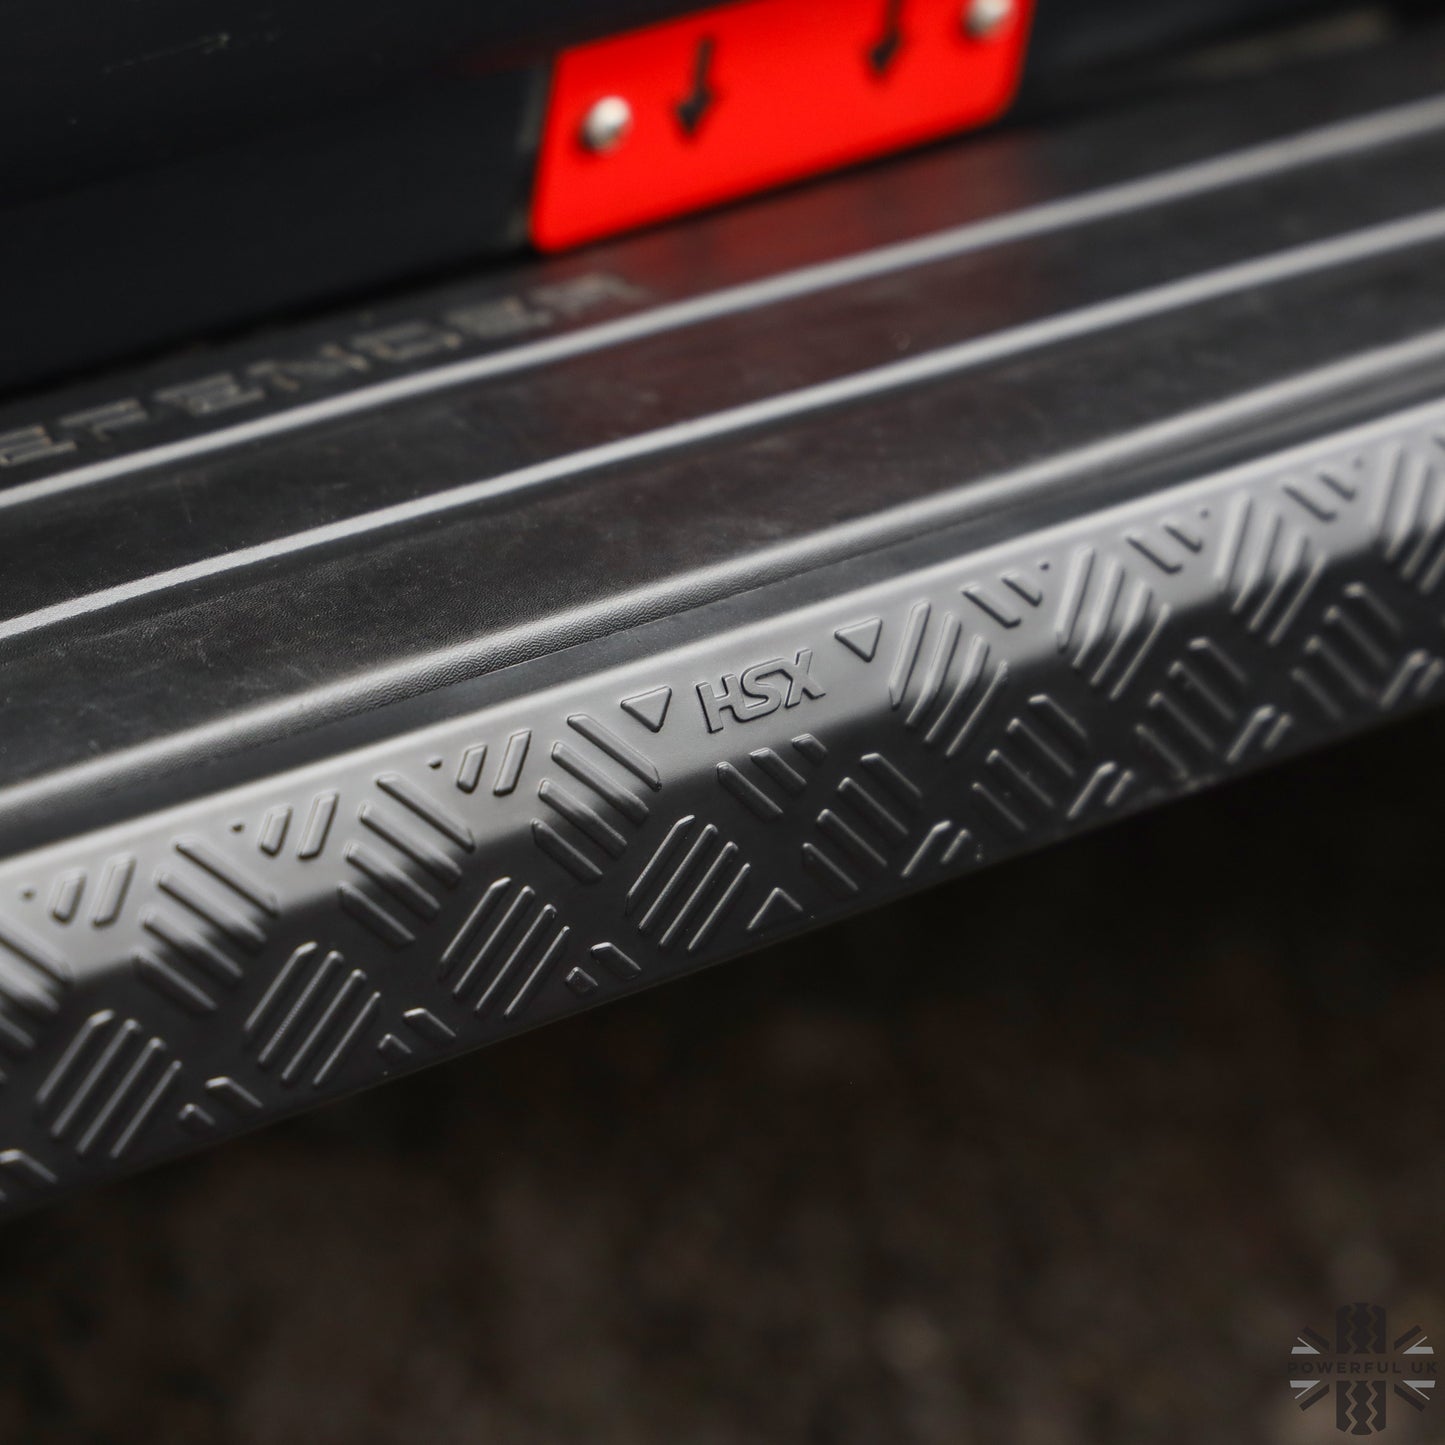 4x Chequer Plate Side Step Covers for Land Rover Defender L663 (110&130) - Satin Black